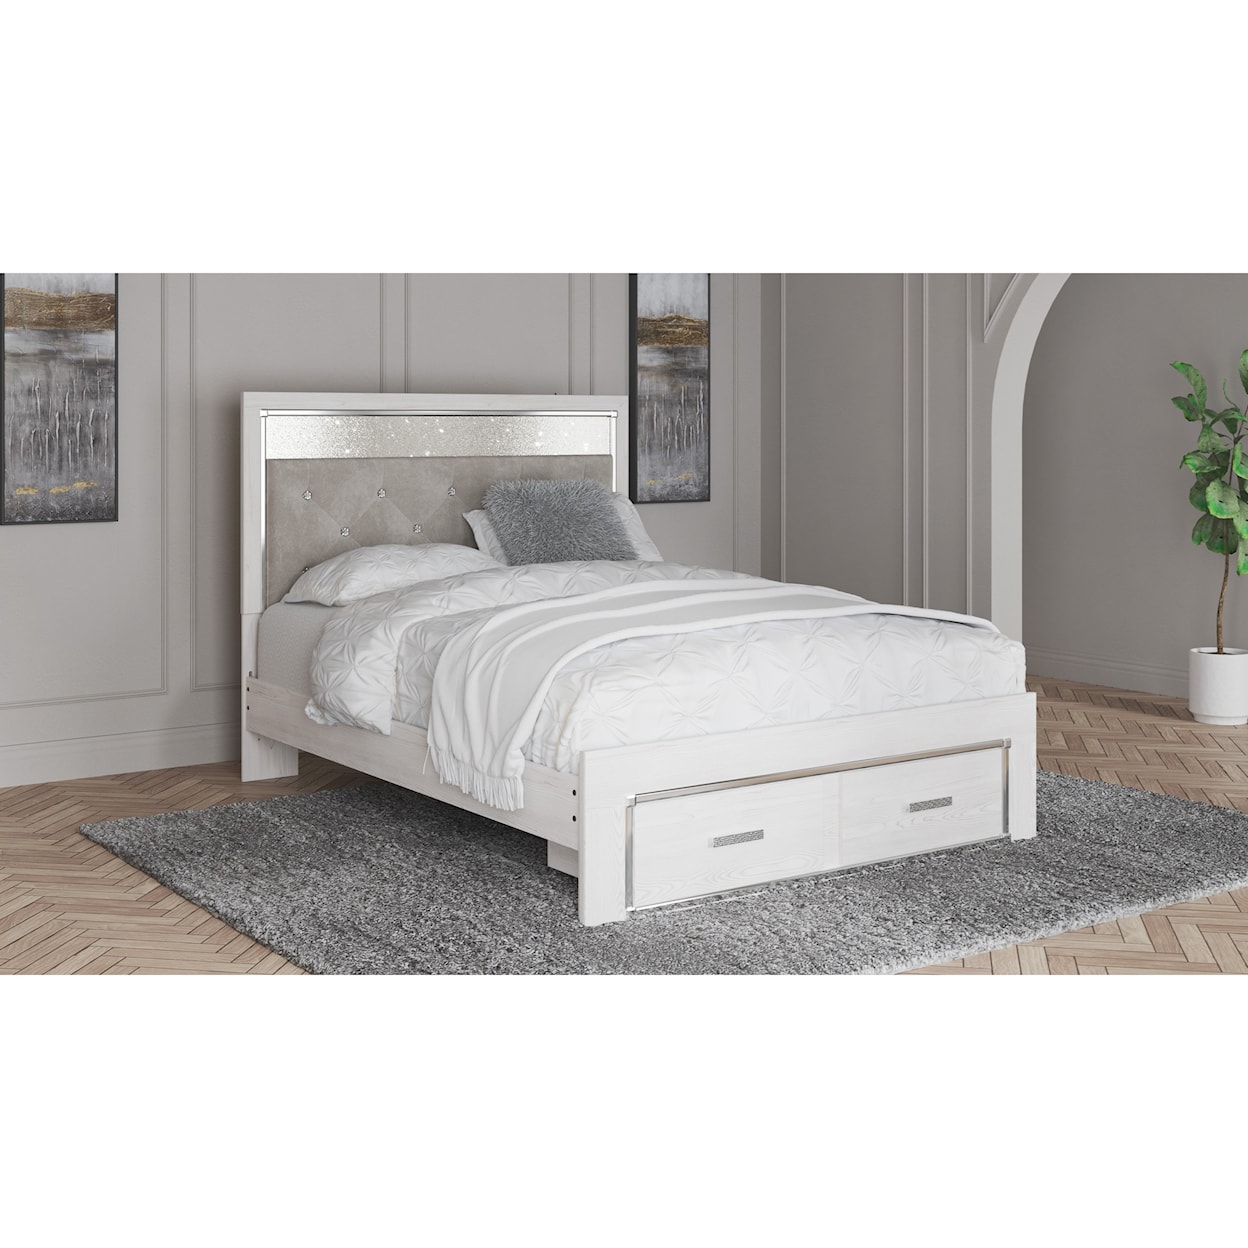 Signature Altyra Queen Storage Bed with Upholstered Headboard